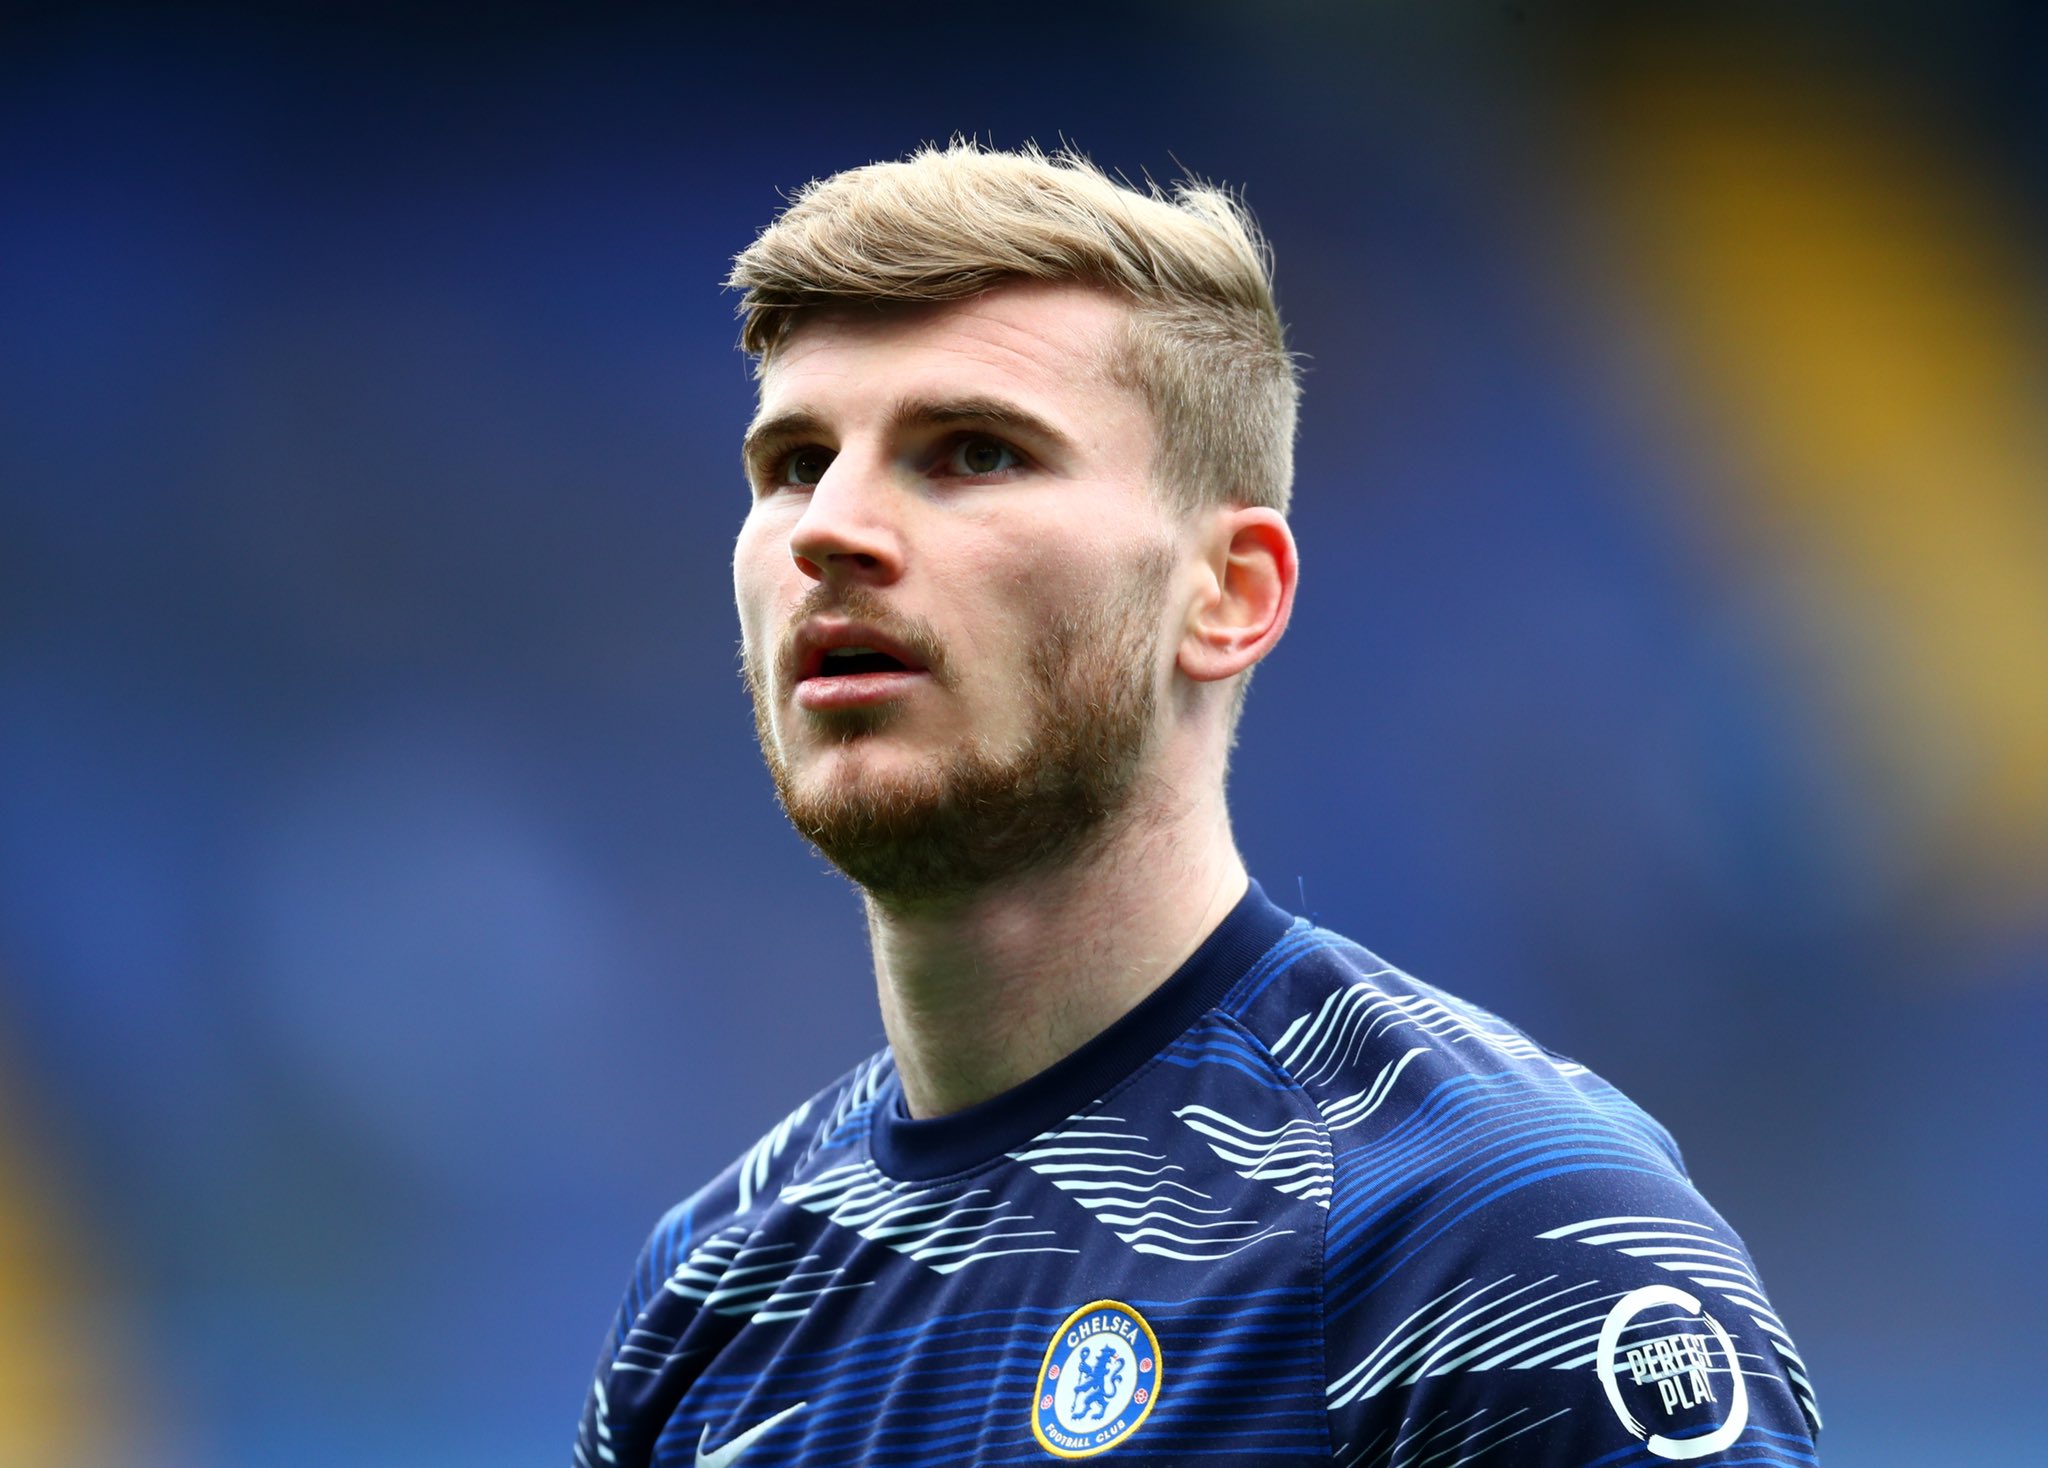 Maybe style of play with Germany suits me better, feels Timo Werner